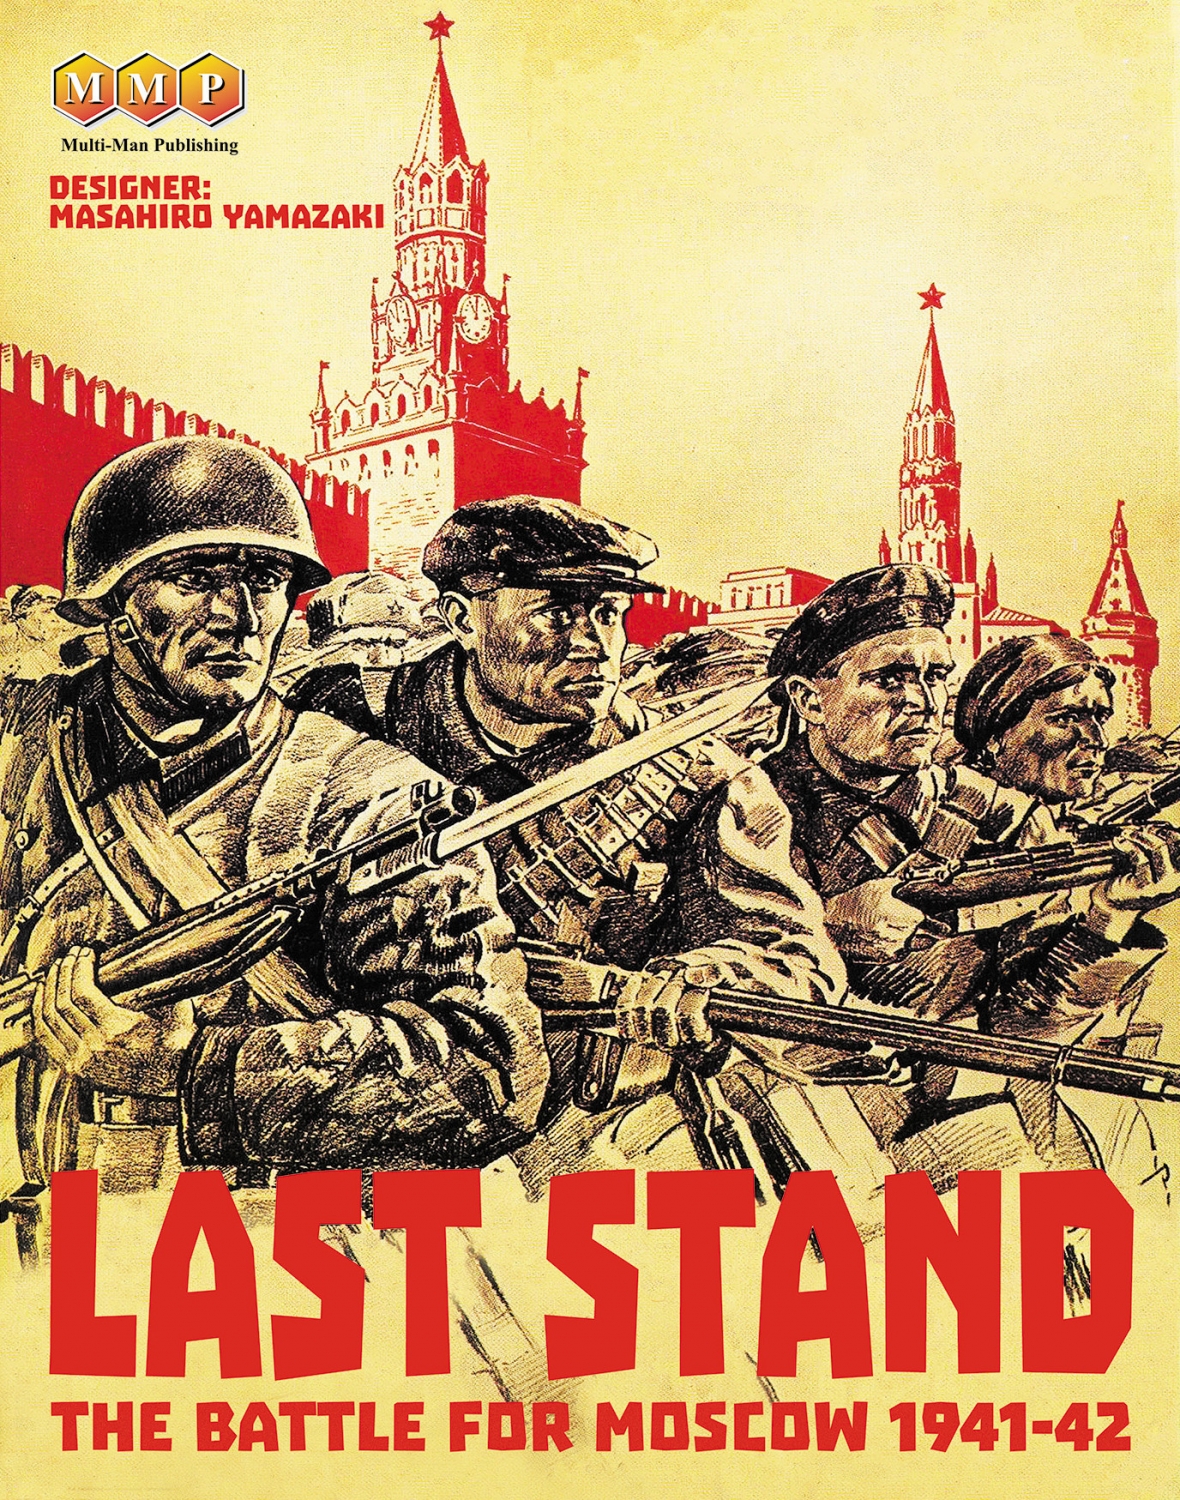 Last Stand - The Battle for Moscow 1941-42